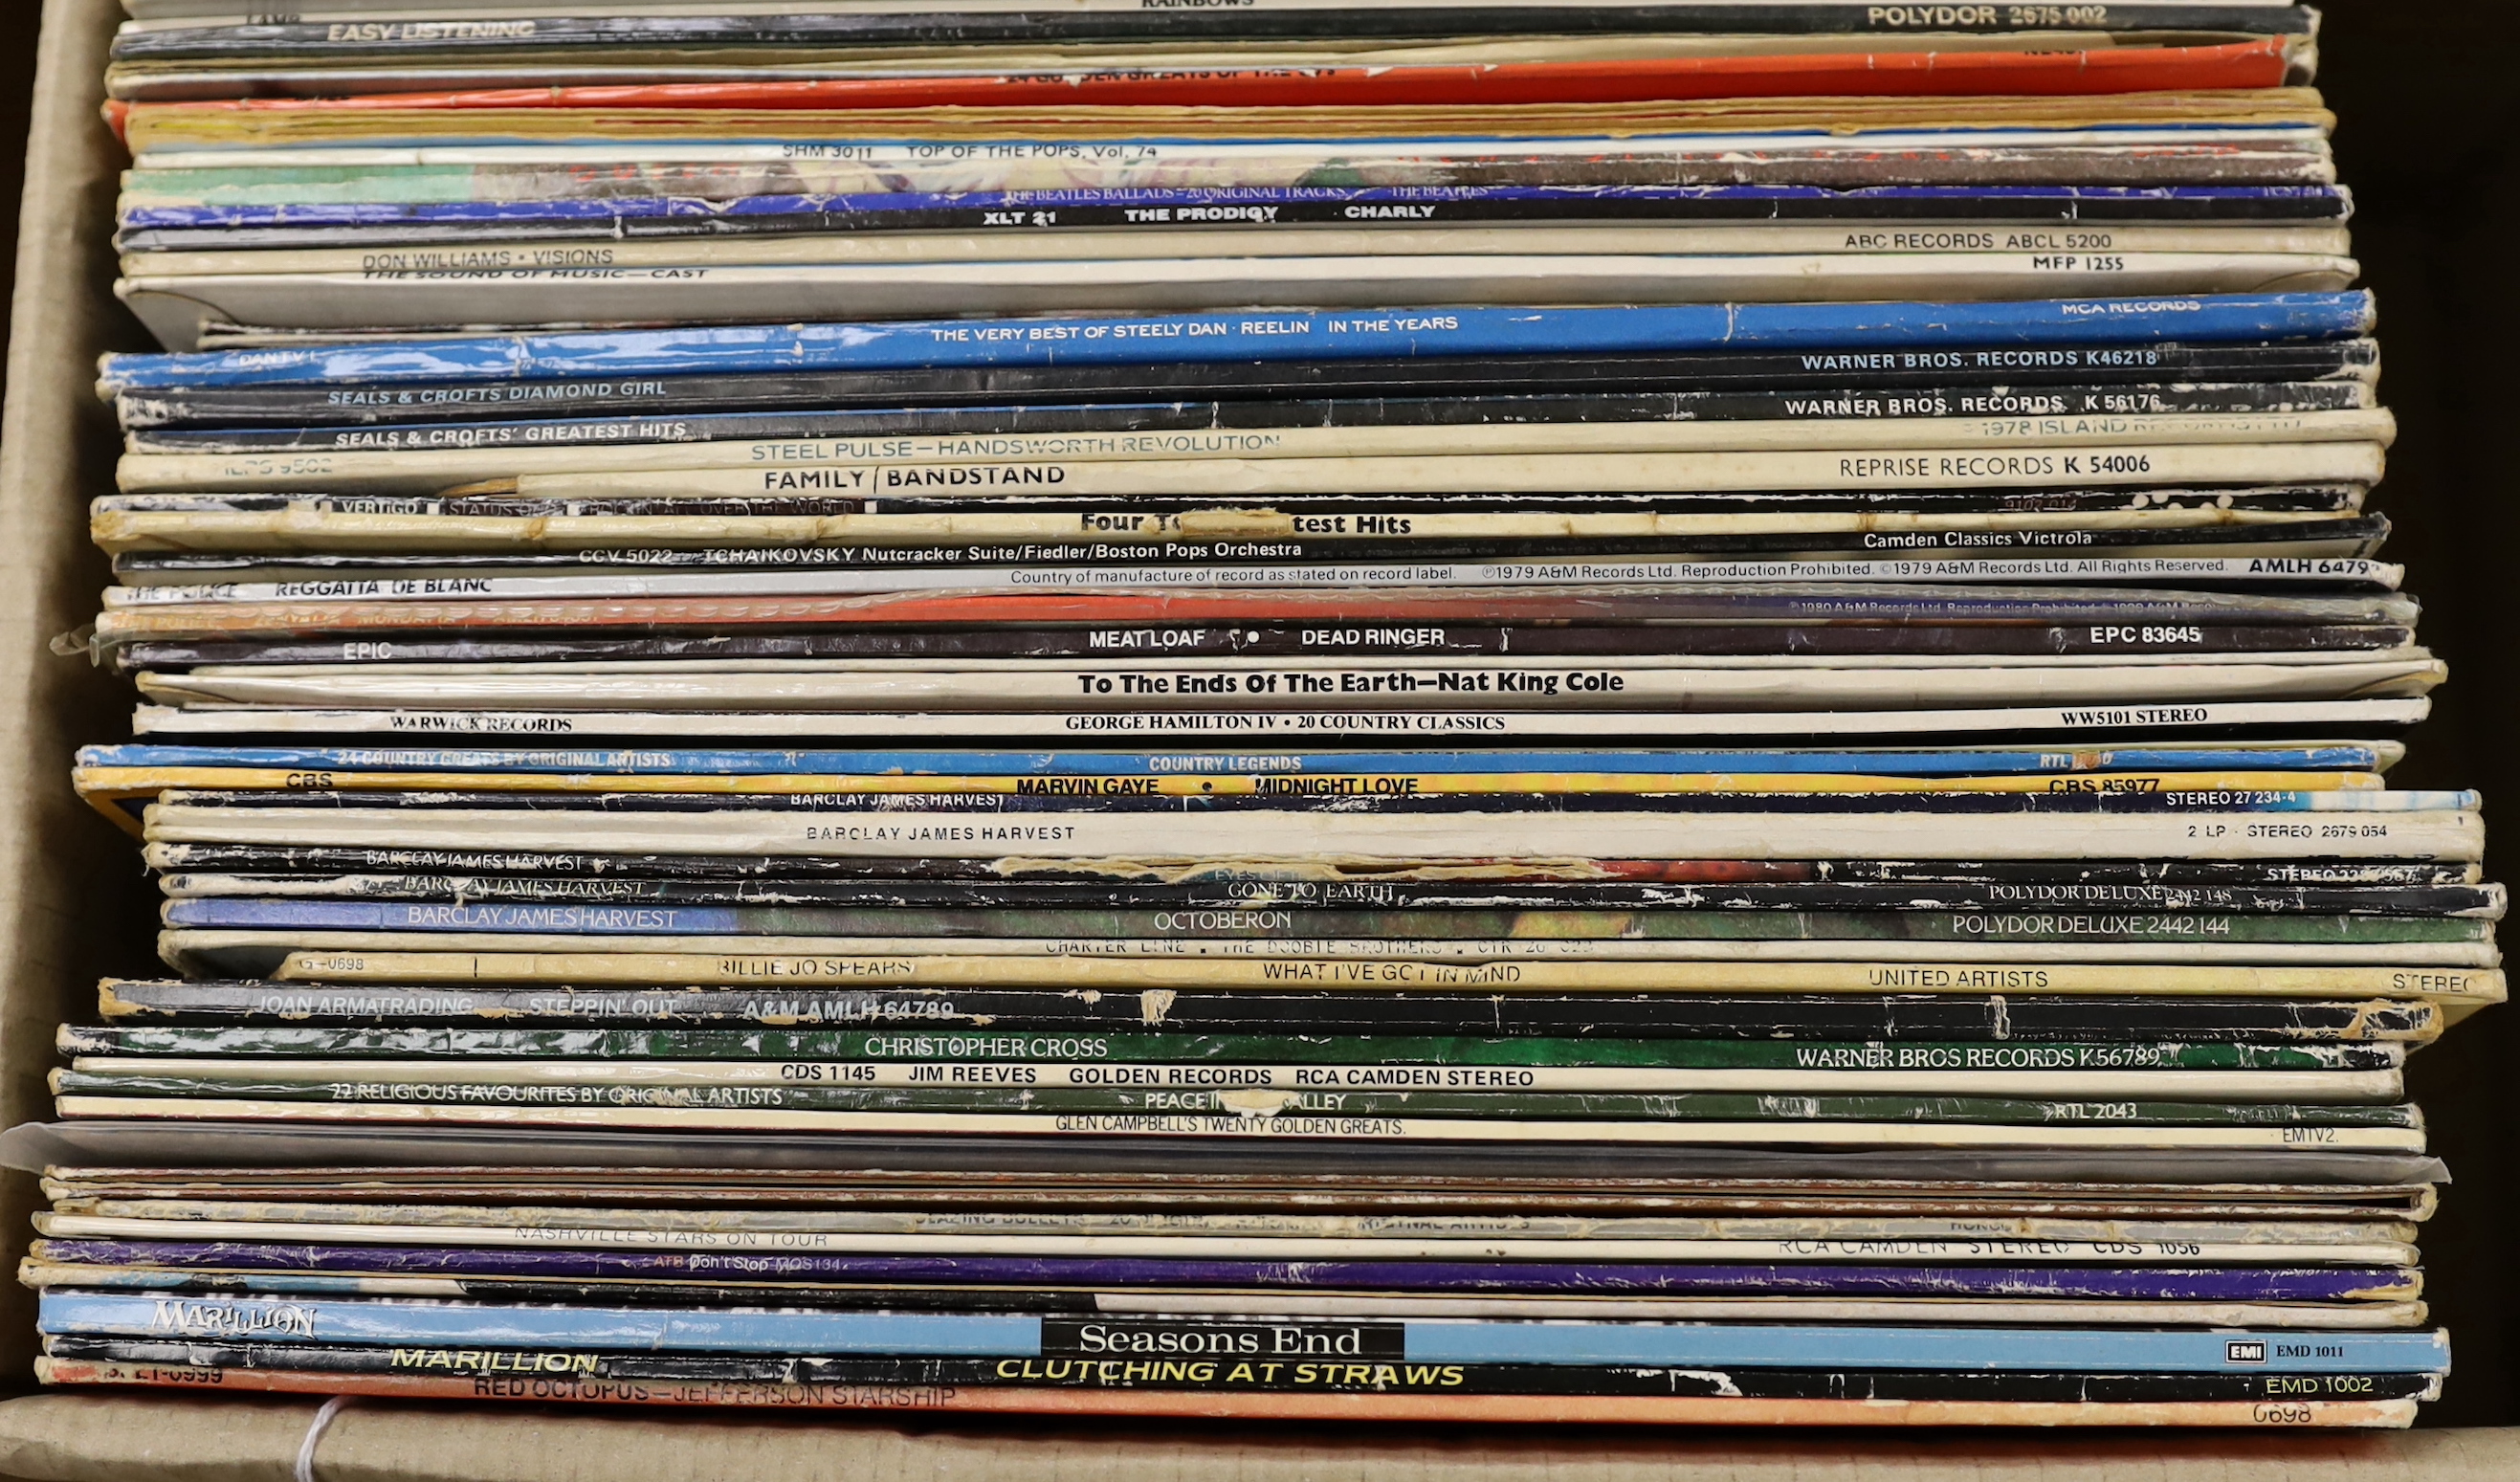 Eighty mostly 1970's/80's LPs etc., including Marillion, Jim Reeves, Barclay James Harvest, Meat Loaf, Steely Dan, Queen, Fleetwood Mac, David Bowie, 10cc, etc.